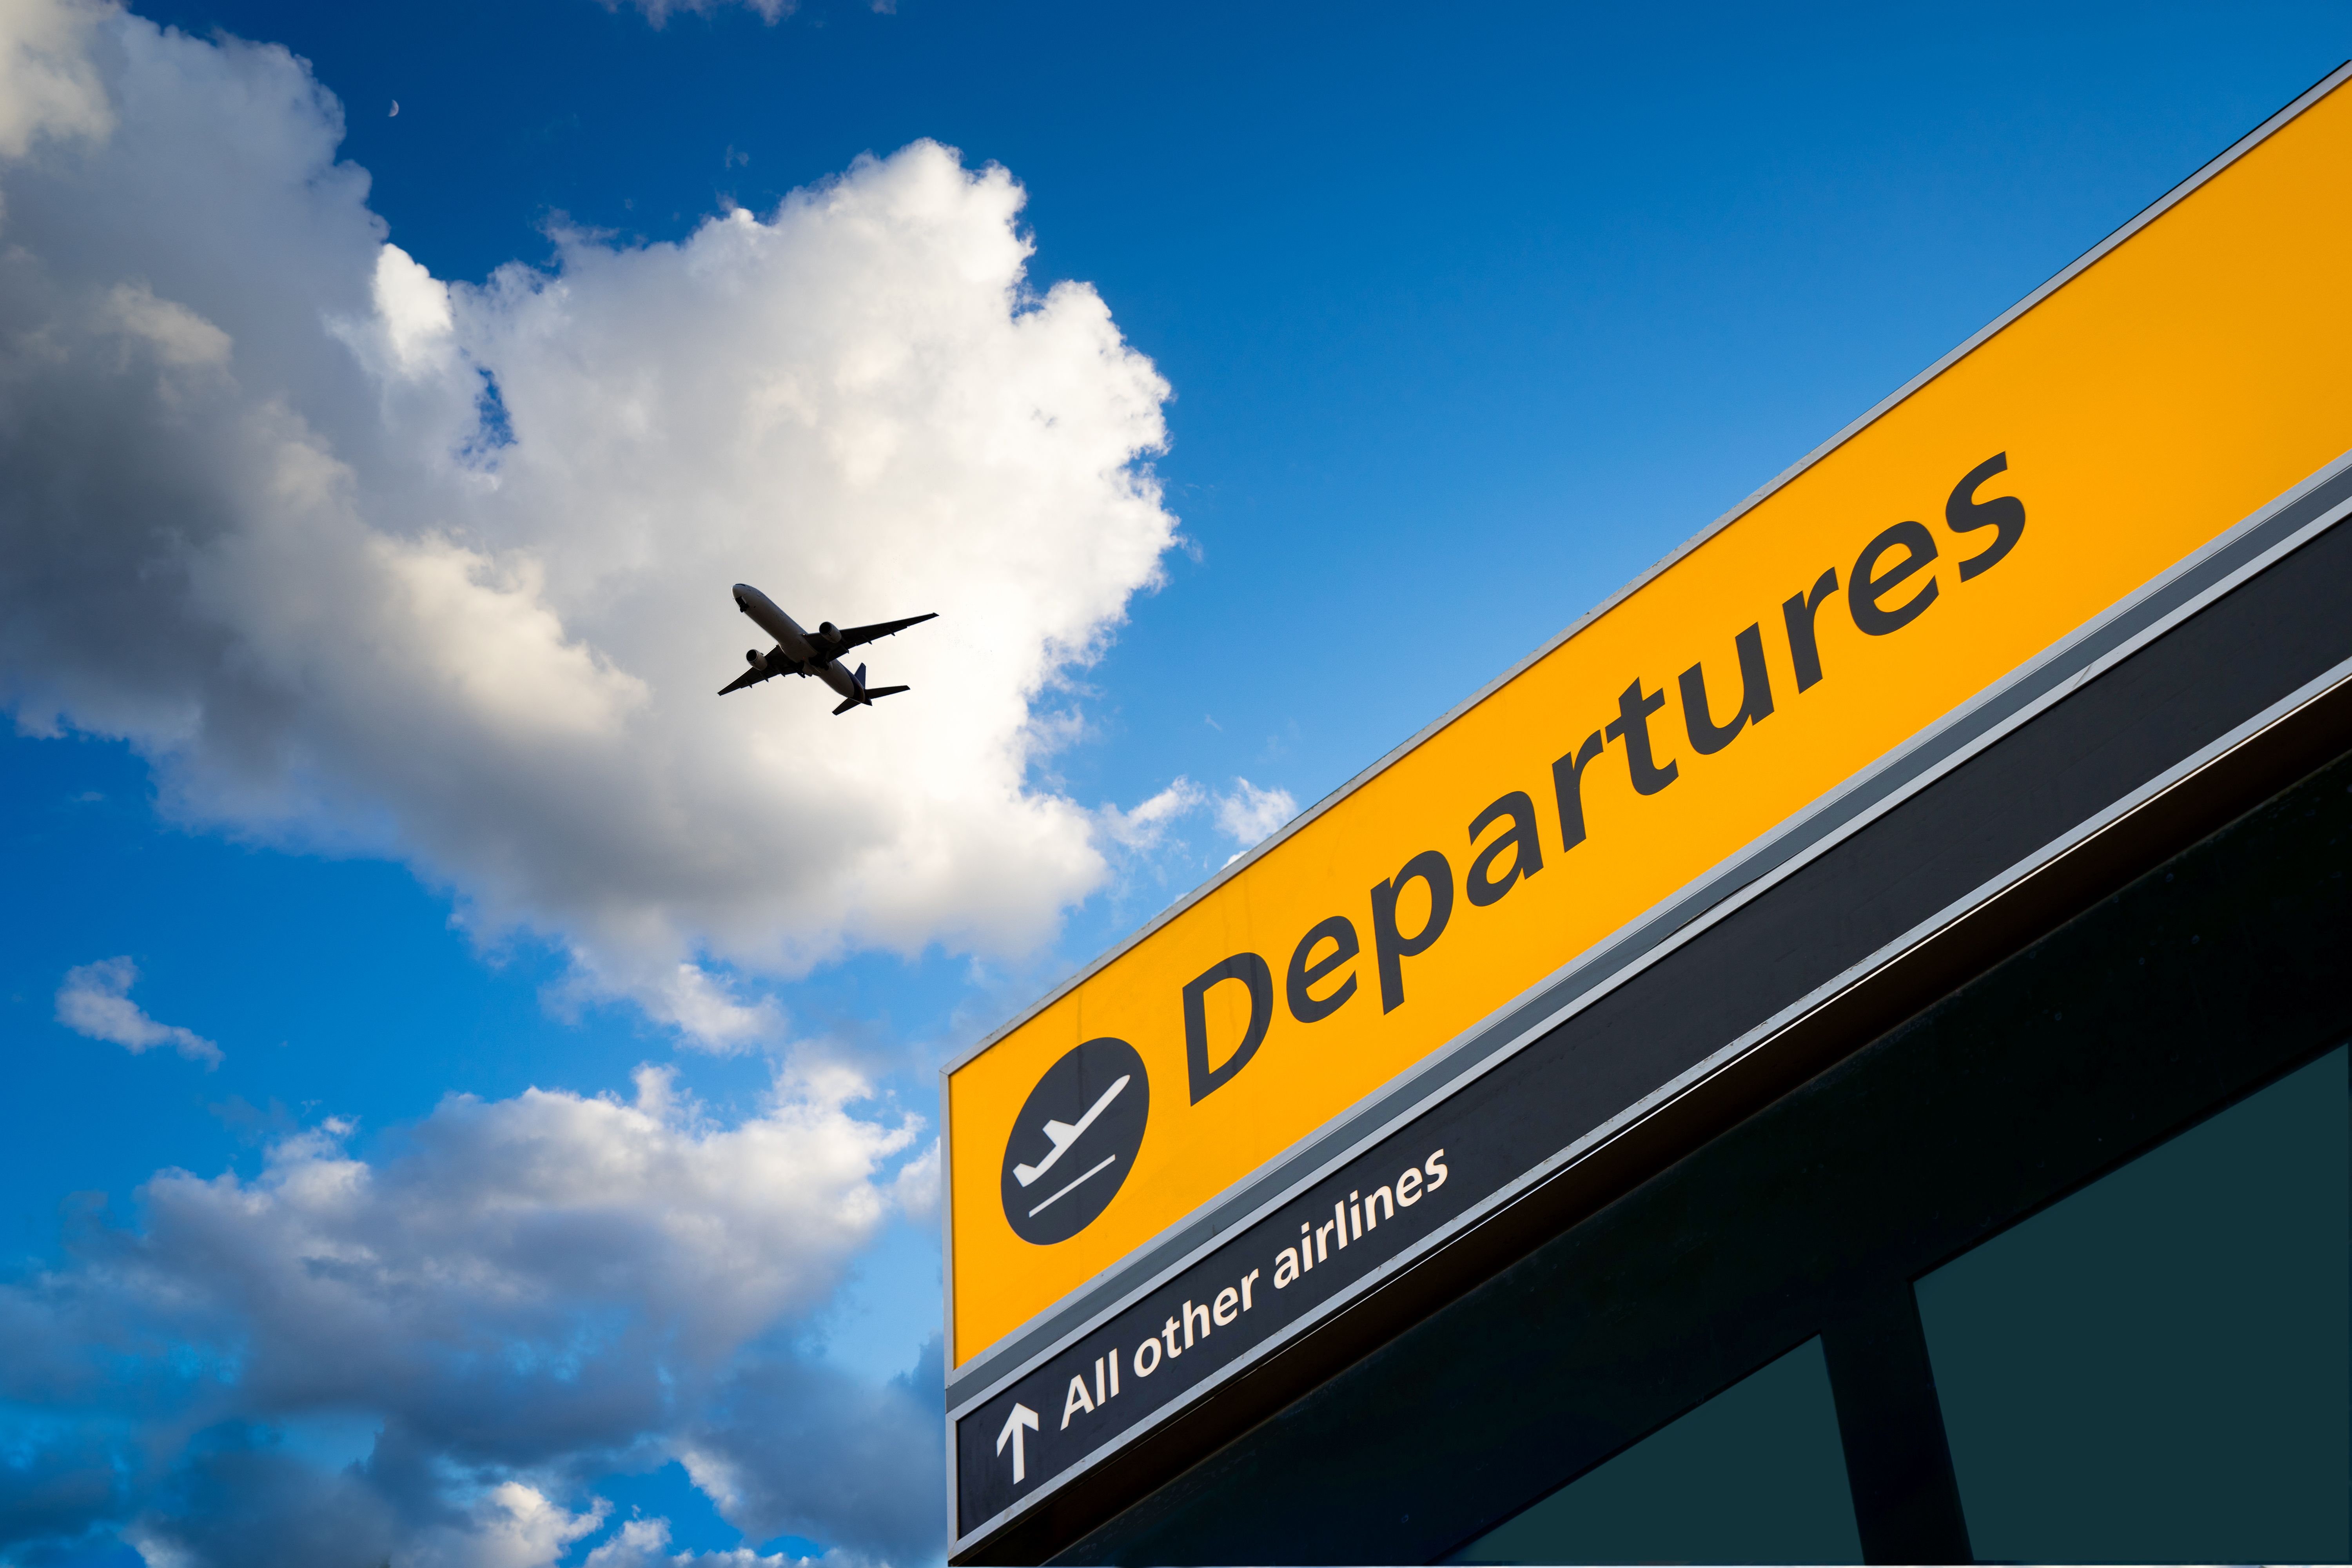 departures sign at heathrow